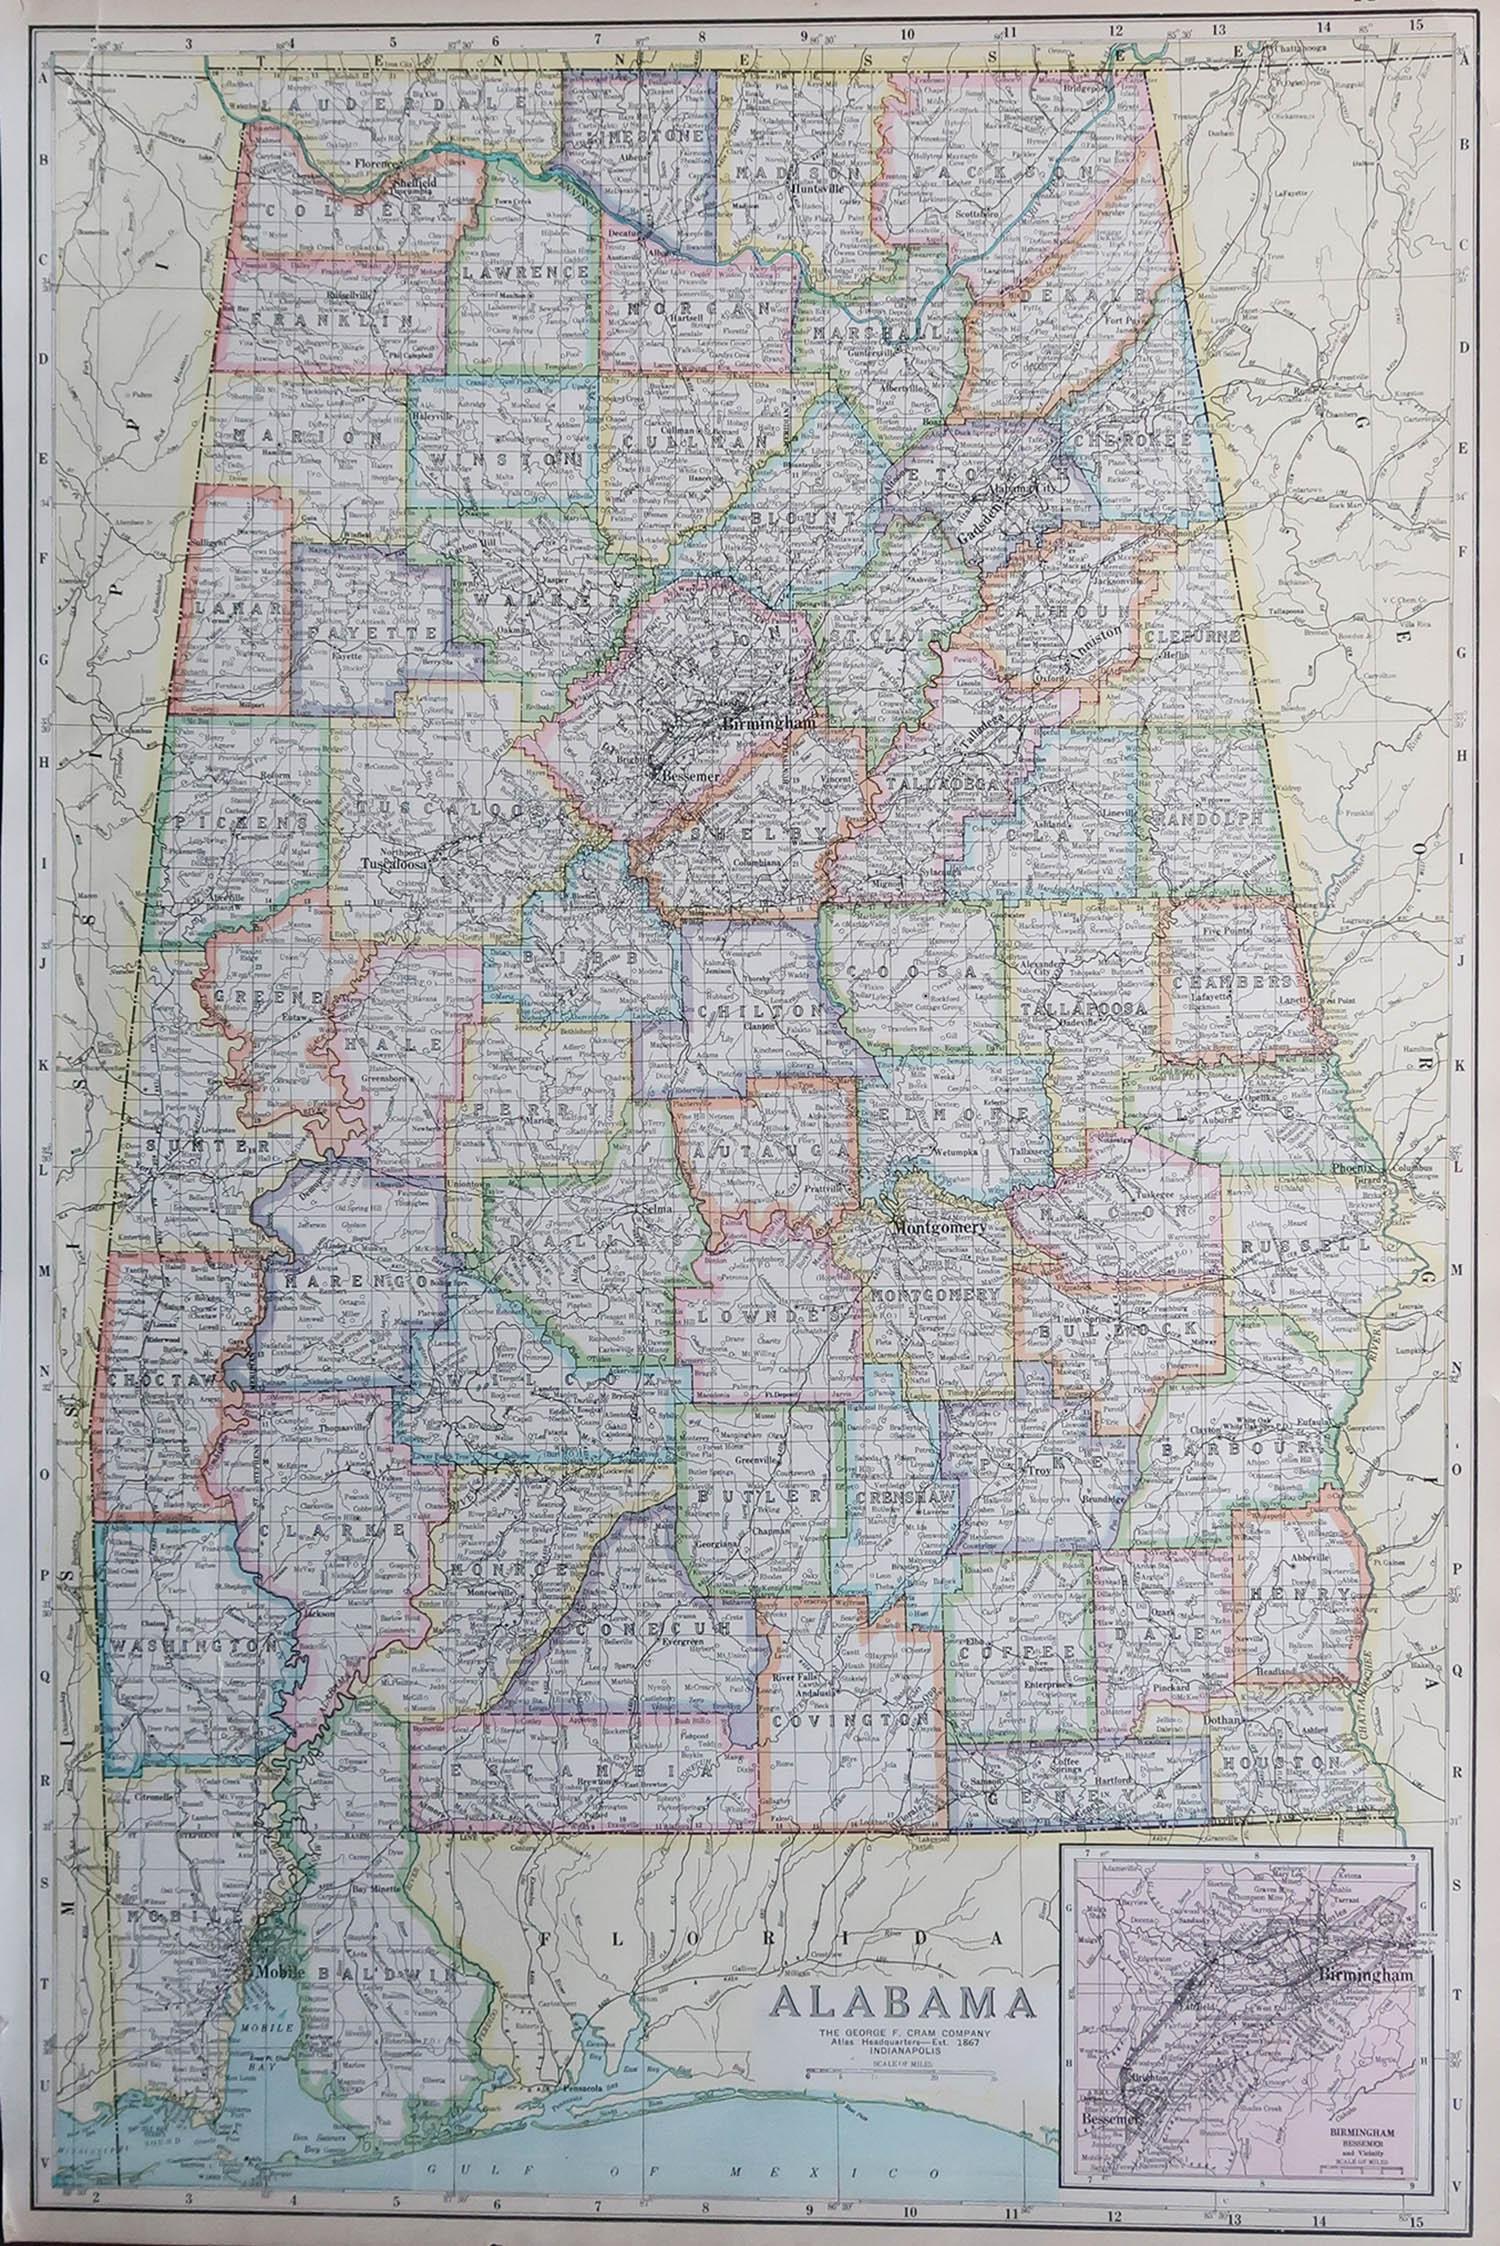 Fabulous map of Alabama

Original color

Engraved and printed by the George F. Cram Company, Indianapolis.

Published, C.1900

Unframed

Repair to a minor edge tear top left corner

Free shipping.